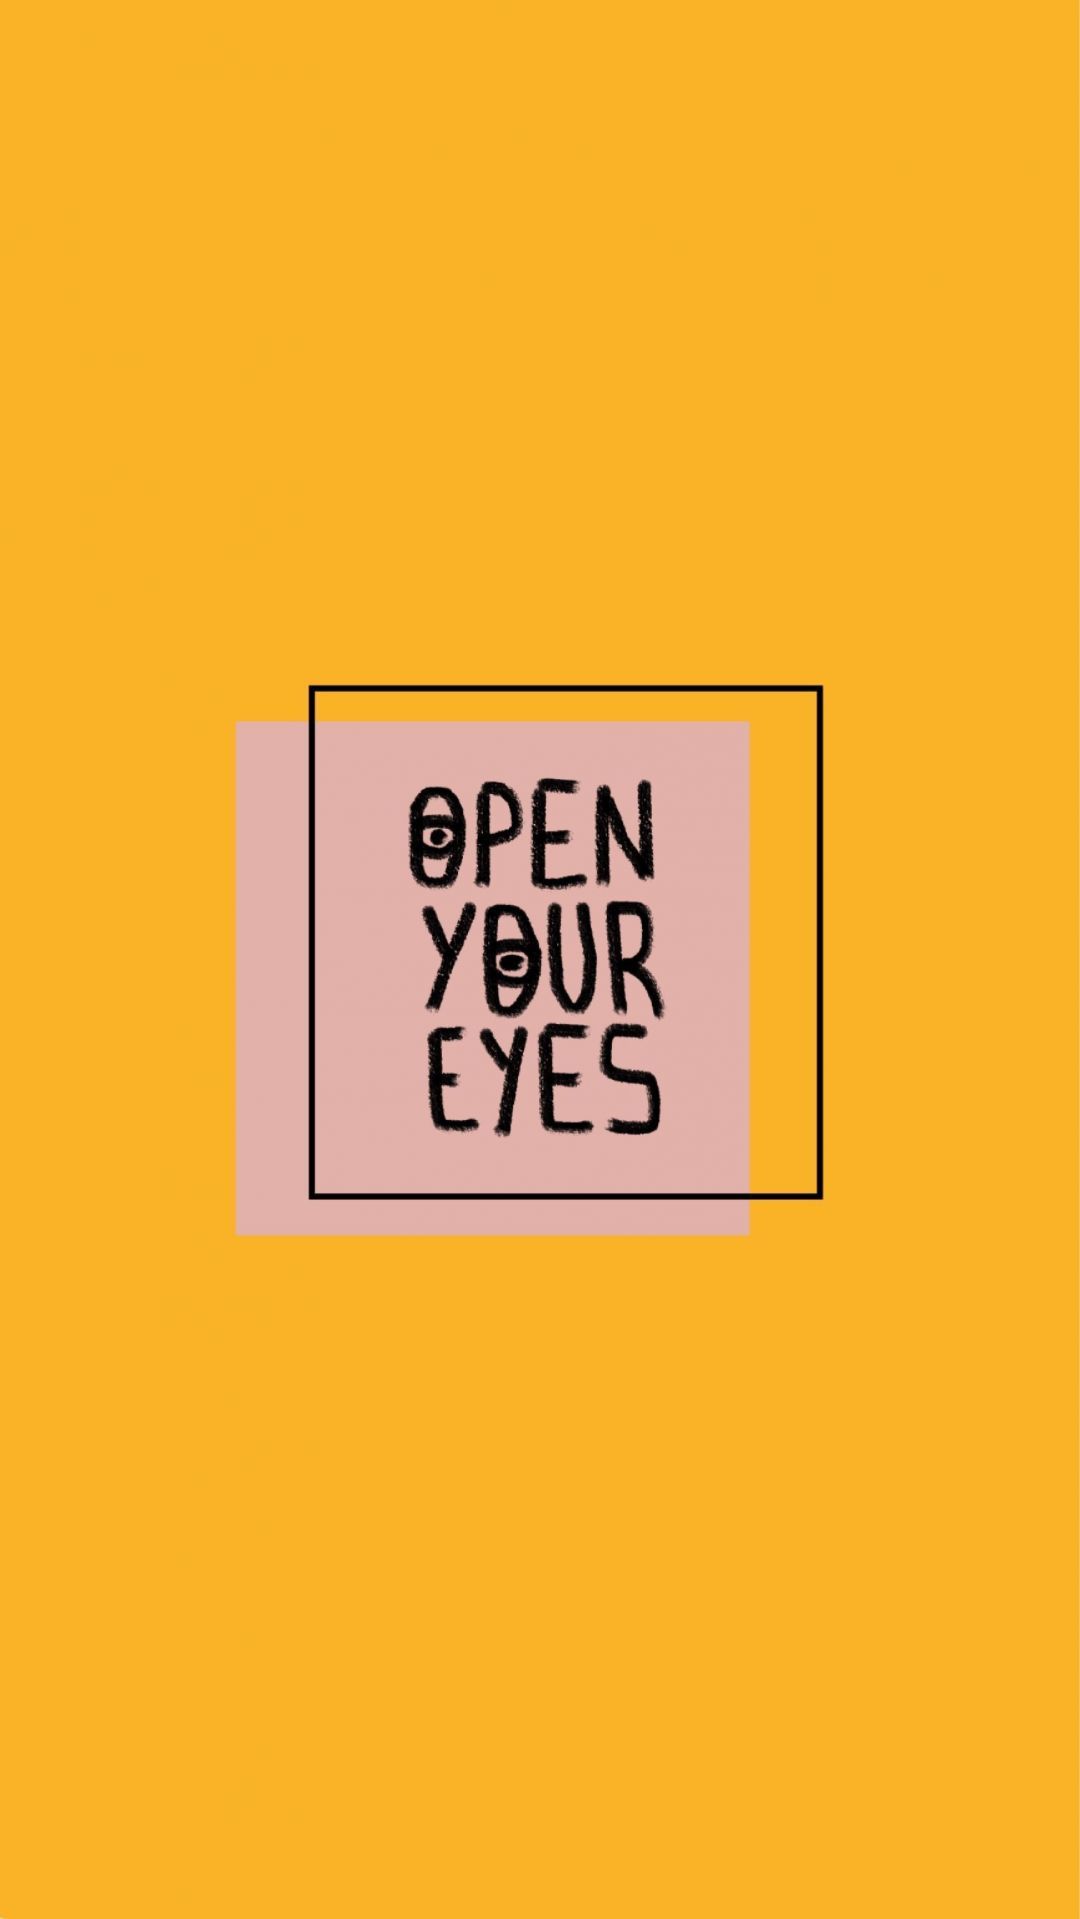 Open your eyes - Inspirational